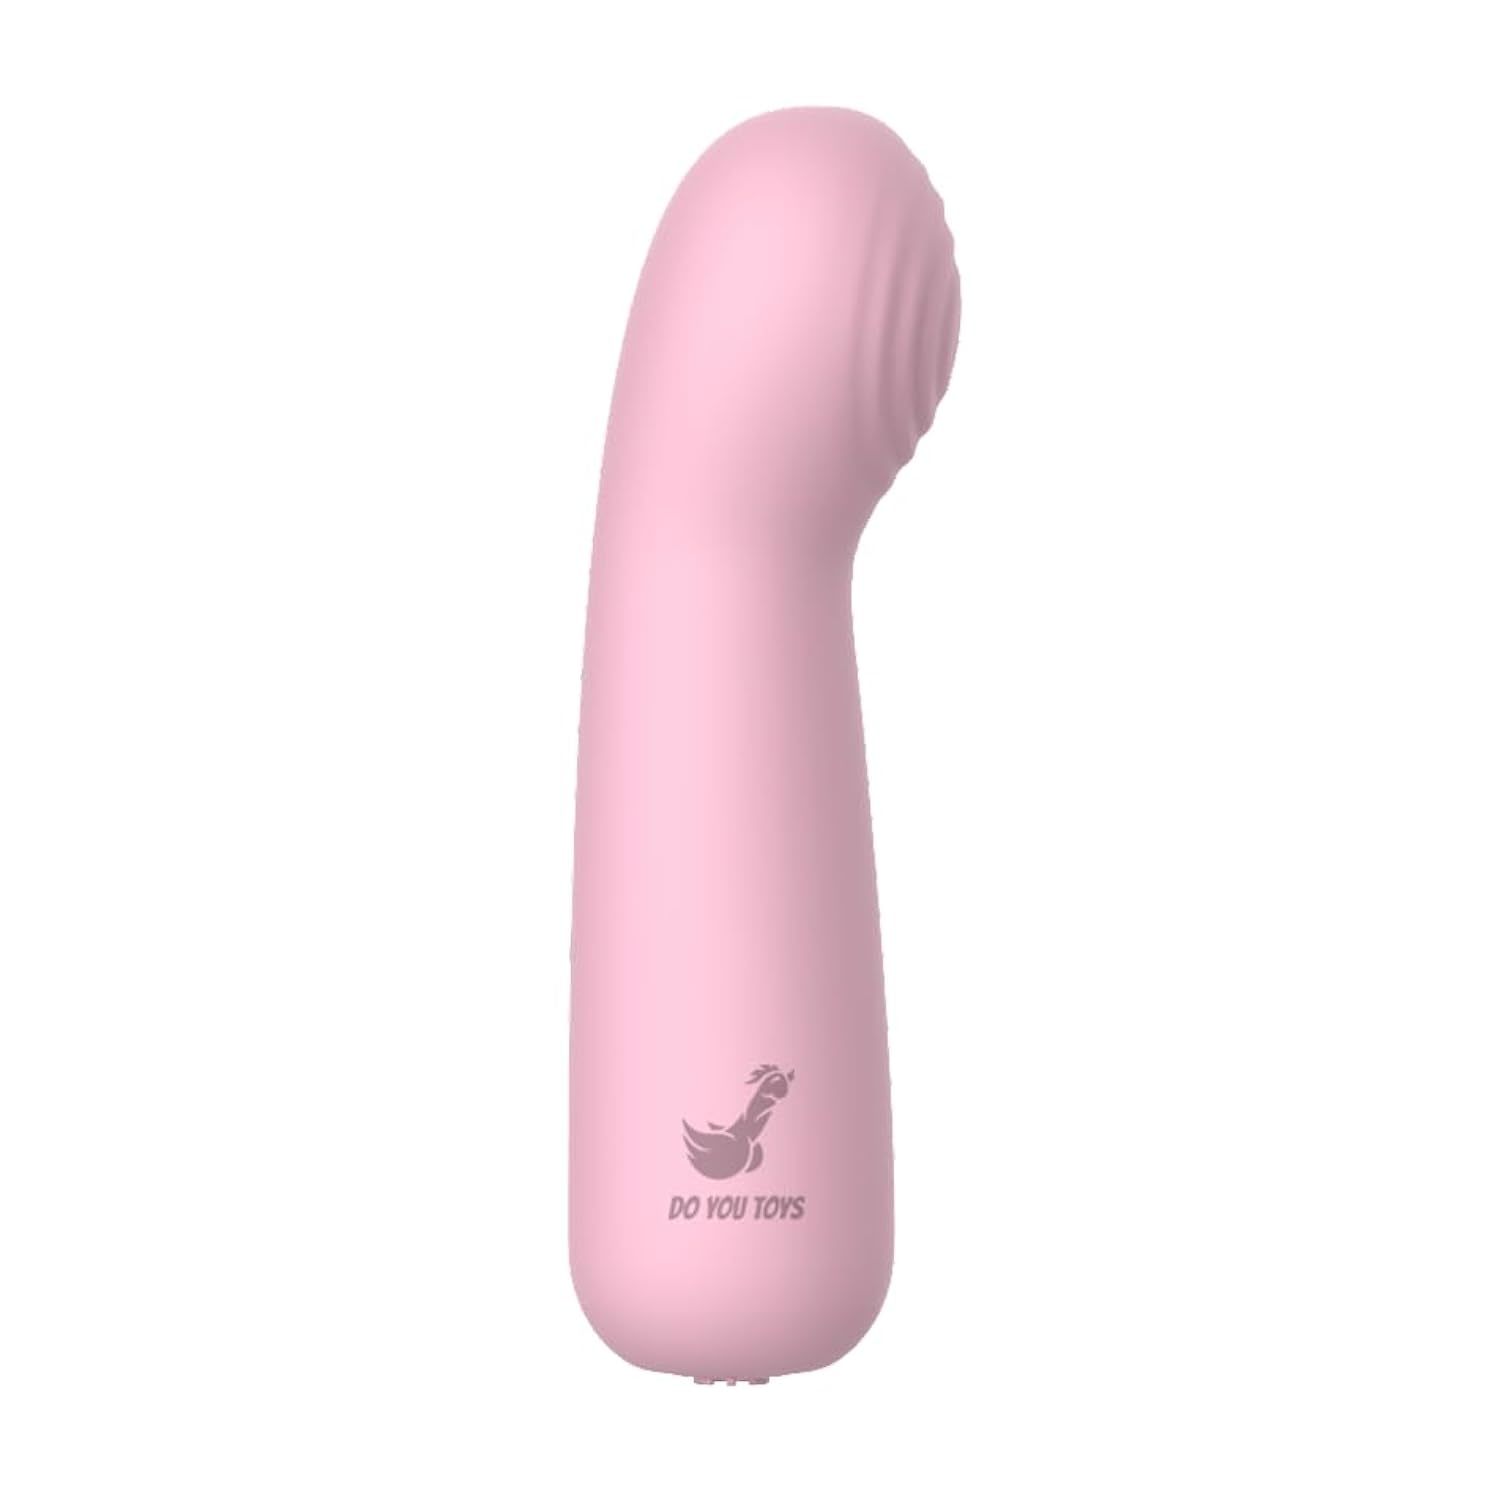 Primary image for Silicone Mini Wand Vibrator For Women - Multi-Function Clitoral Wand Vibrator Wi